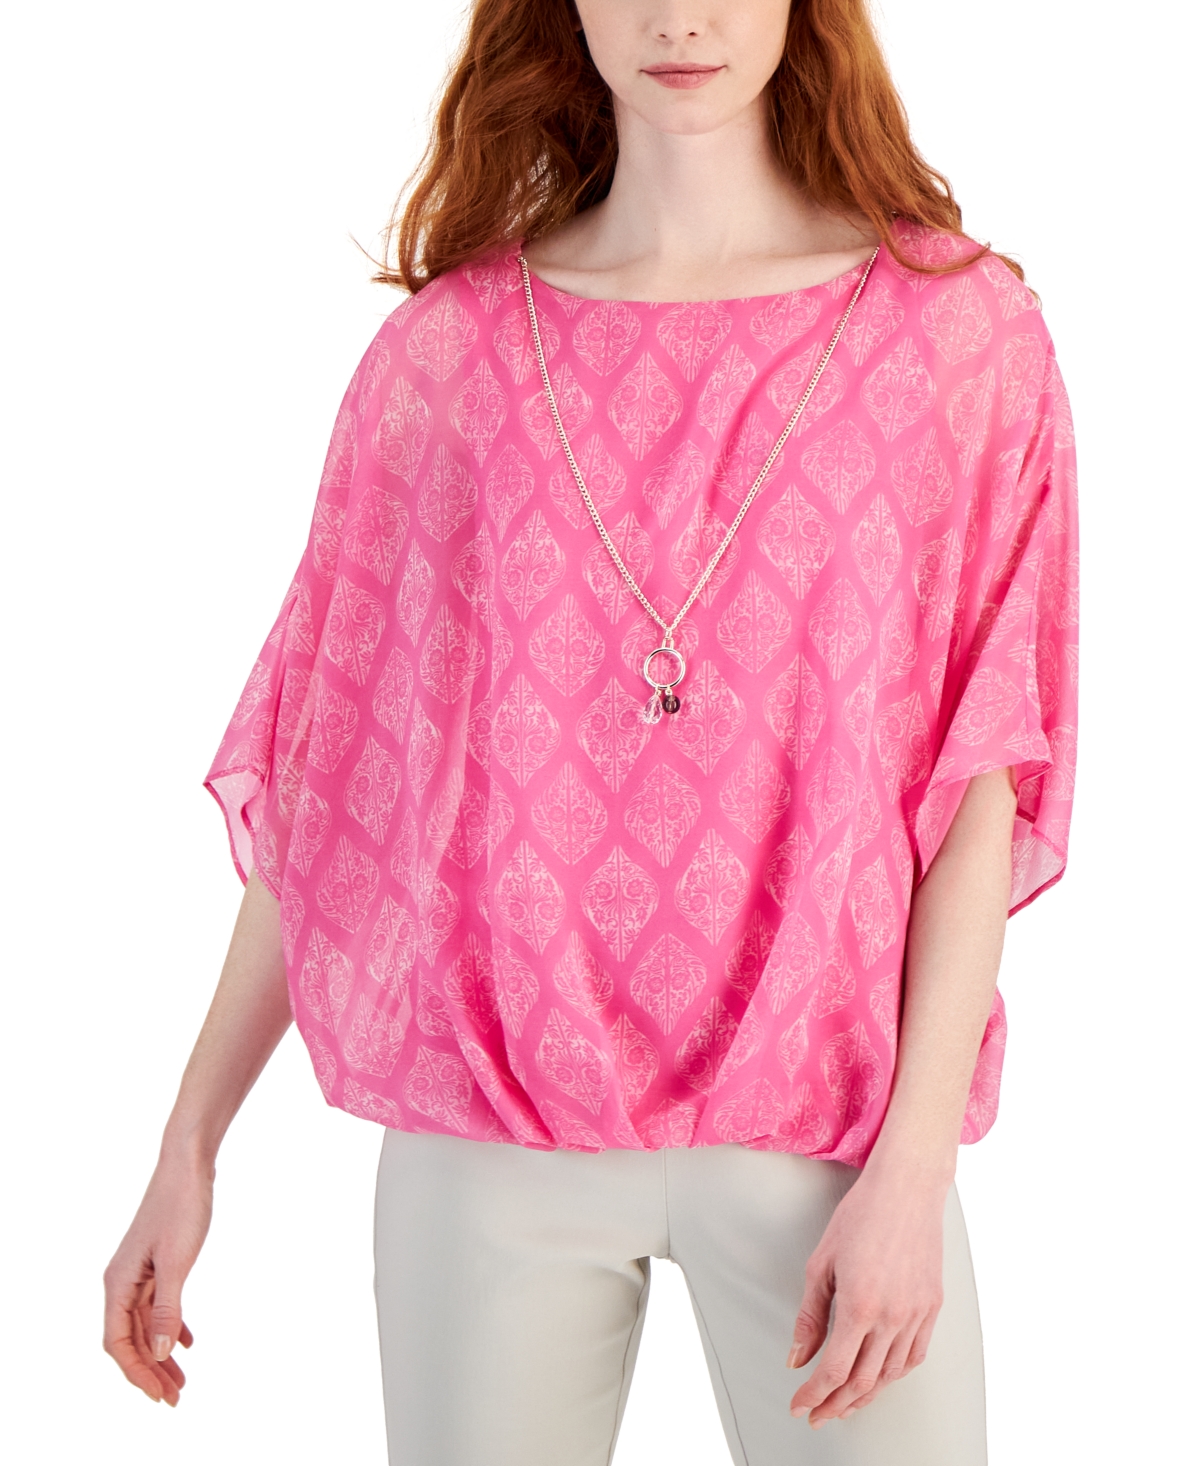 Women's Printed Poncho-Sleeve Necklace Top, Created for Macy's - Bright Pink Combo